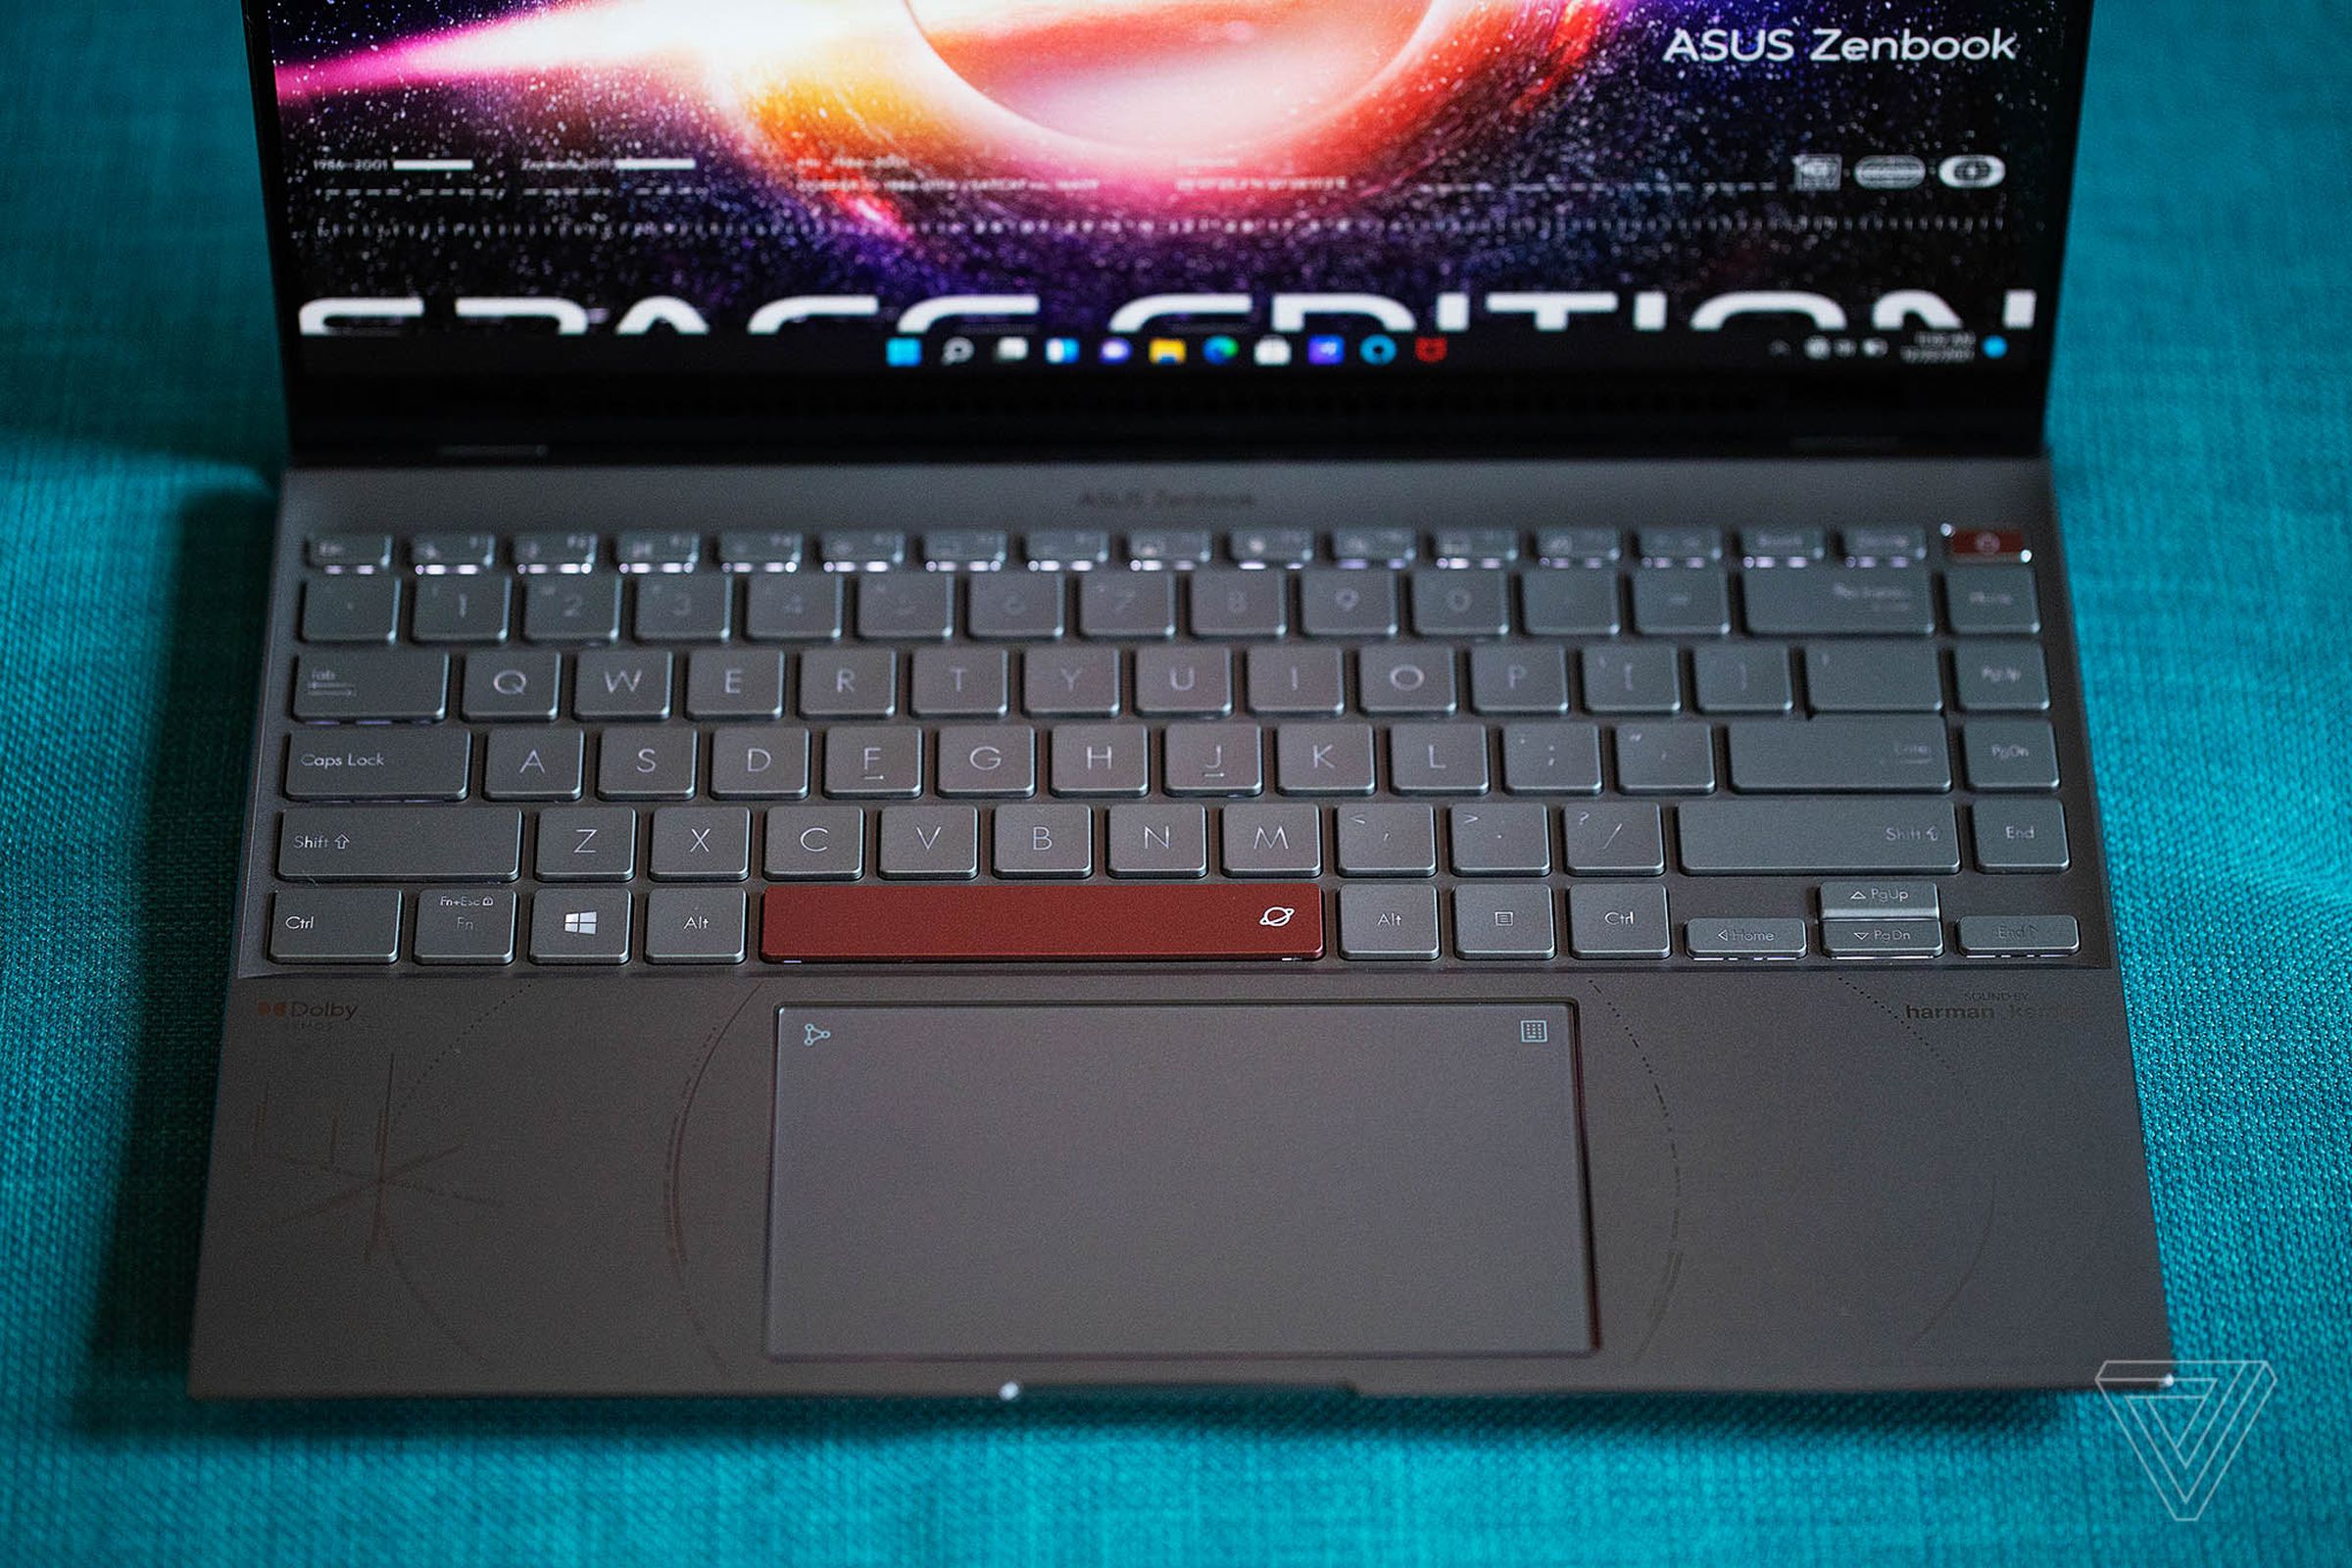 The Asus Zenbook 14 OLED Space Edition keyboard seen from above. The screen displays the words Space Edition.